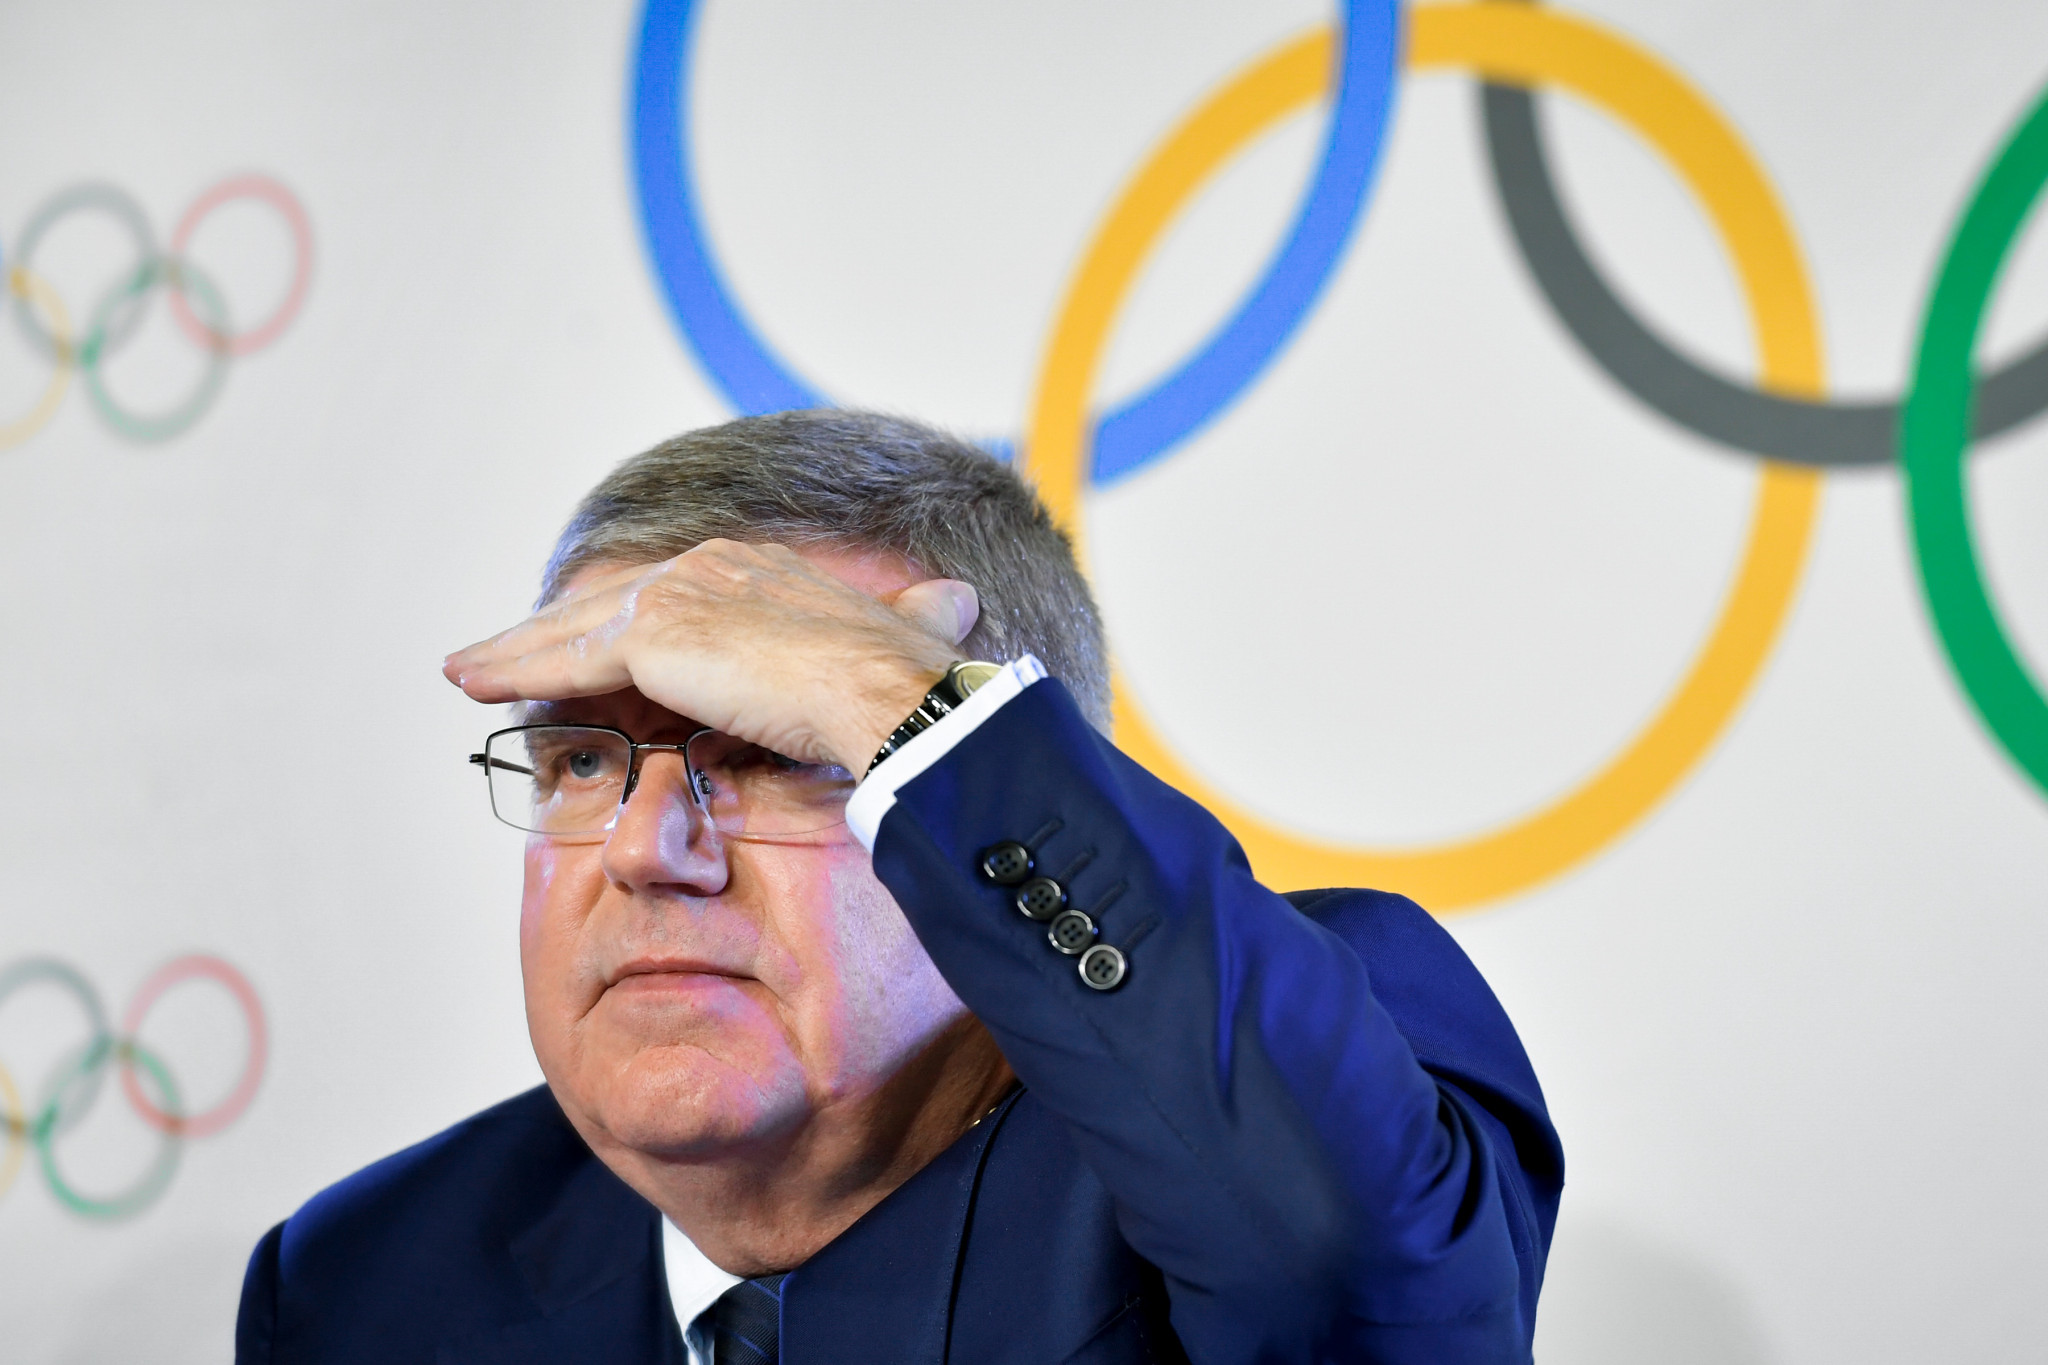 IOC President Thomas Bach claimed to be hopeful that Yuliya Stepanova would be able to compete at Tokyo 2020 ©Getty Images